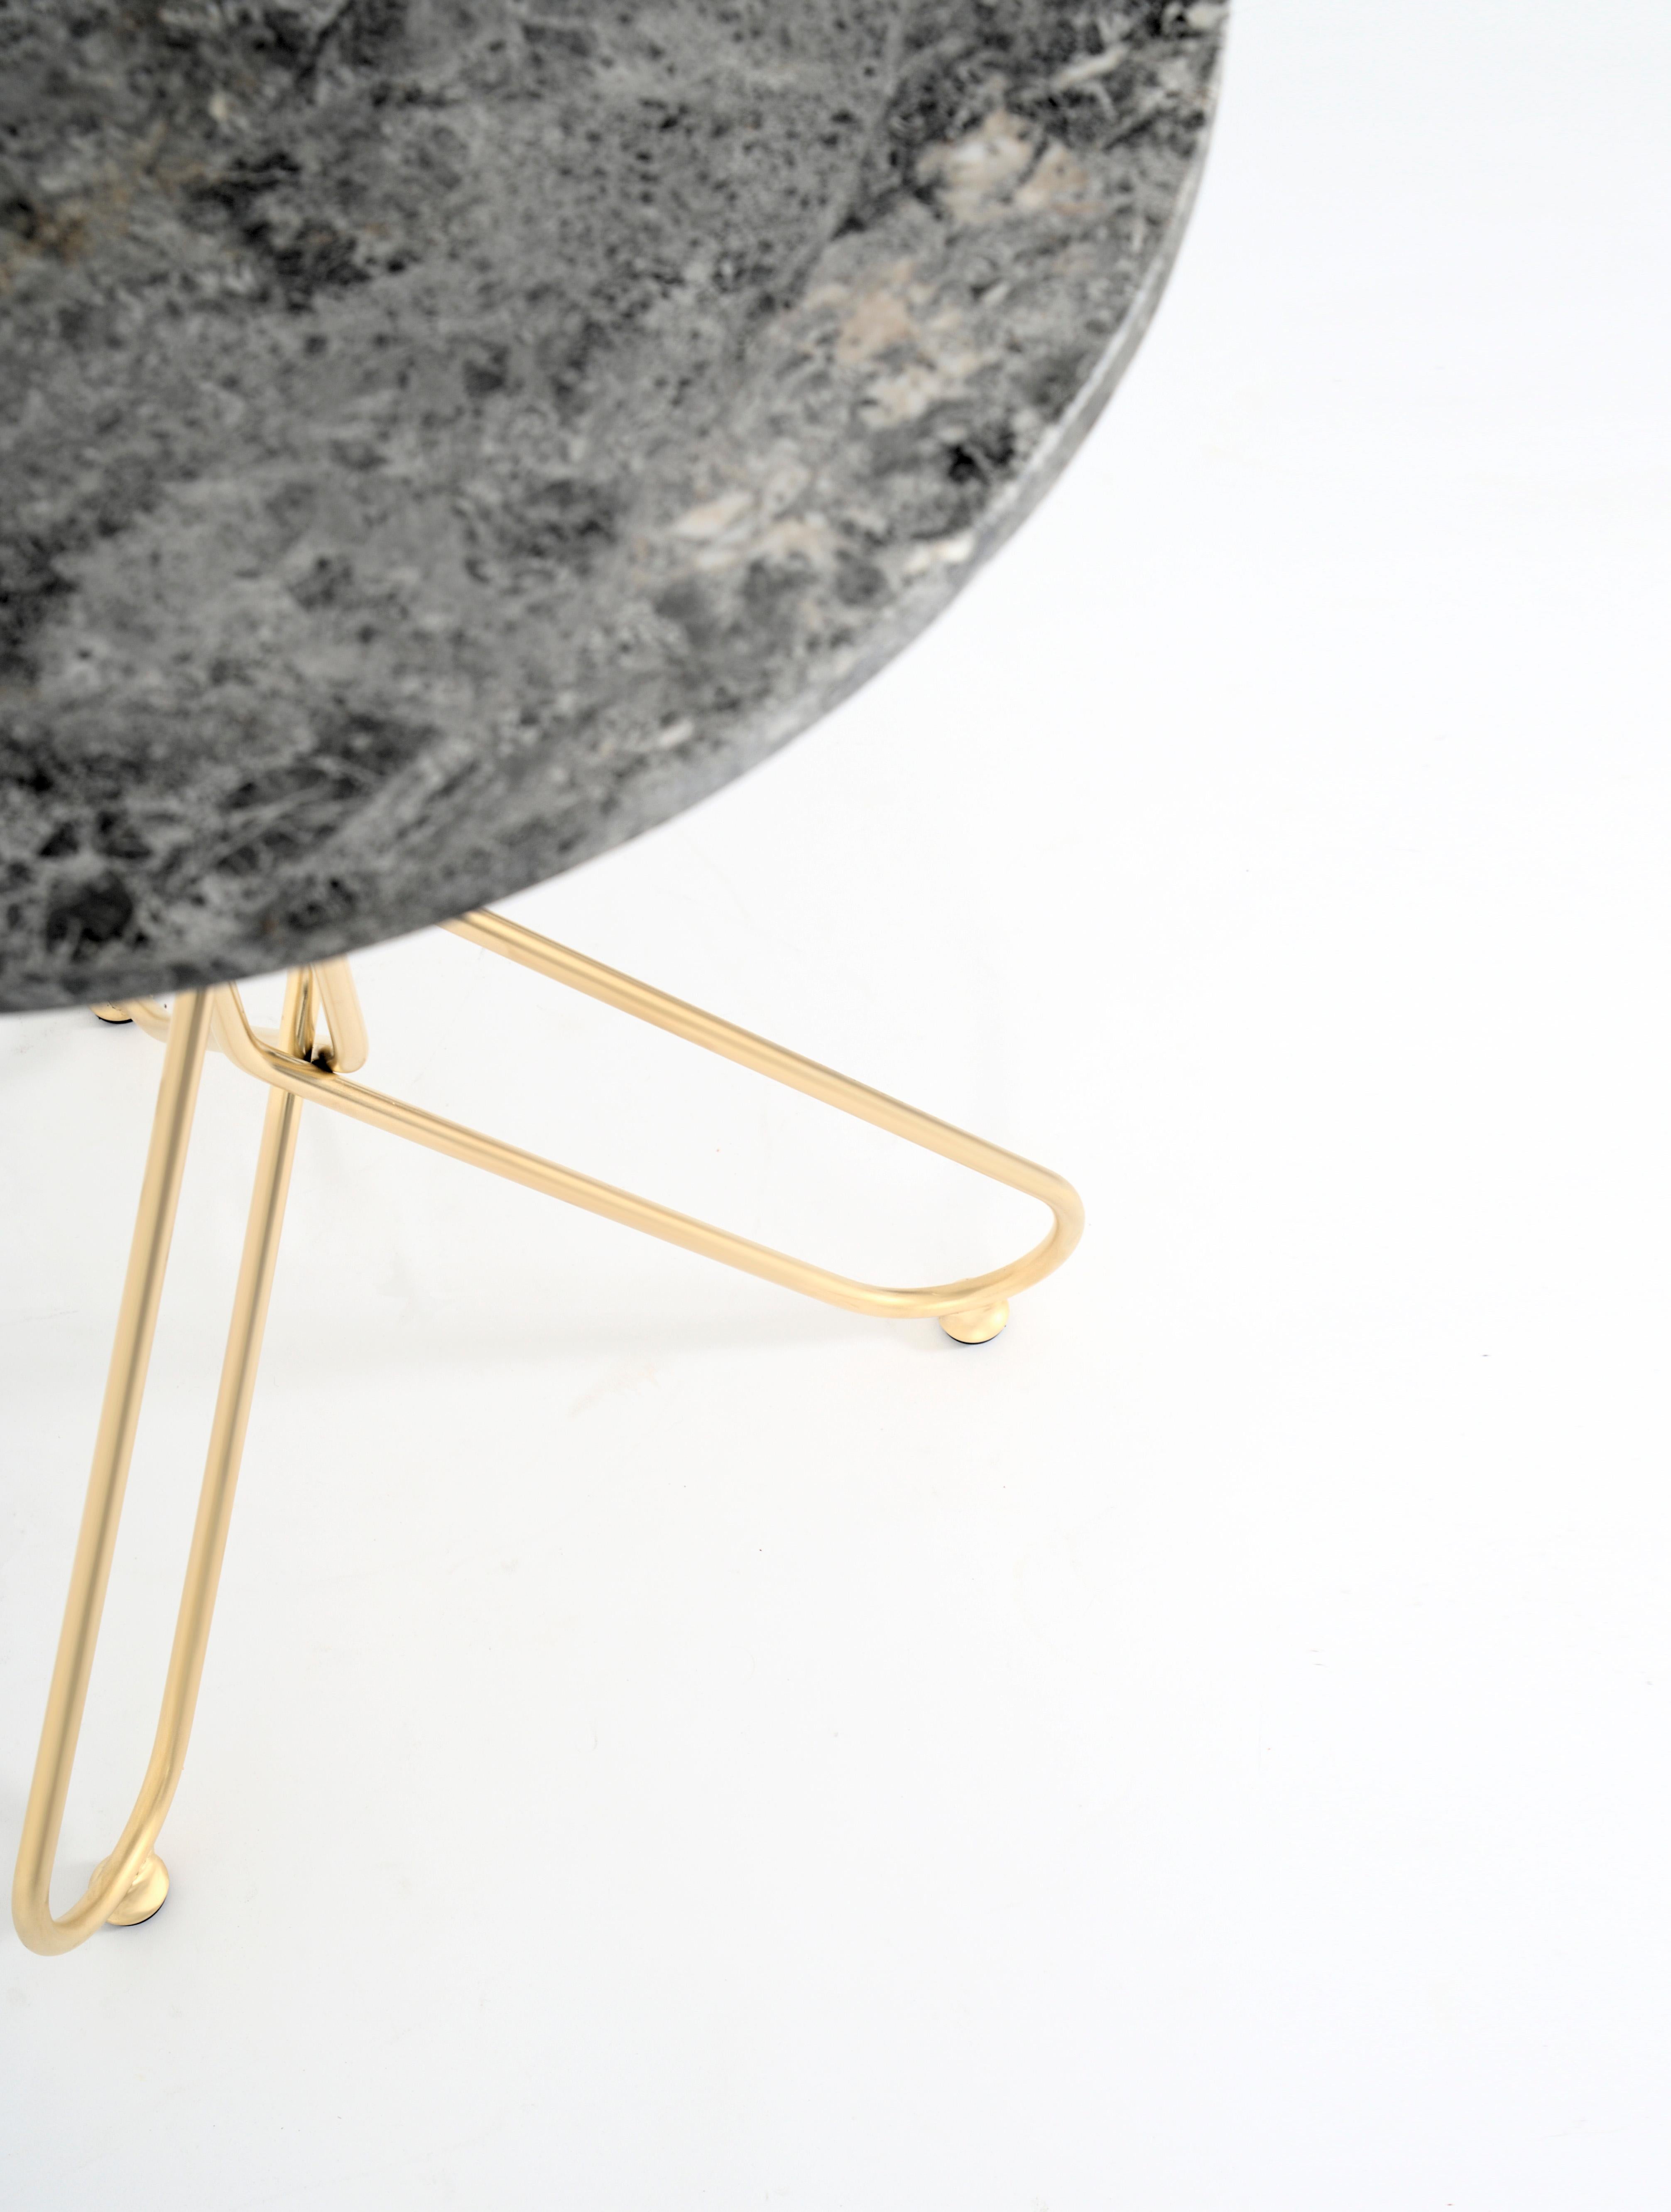 Modern Cota Marble Contemporary Gold Table design Enrico Girotti by lapiegaWD